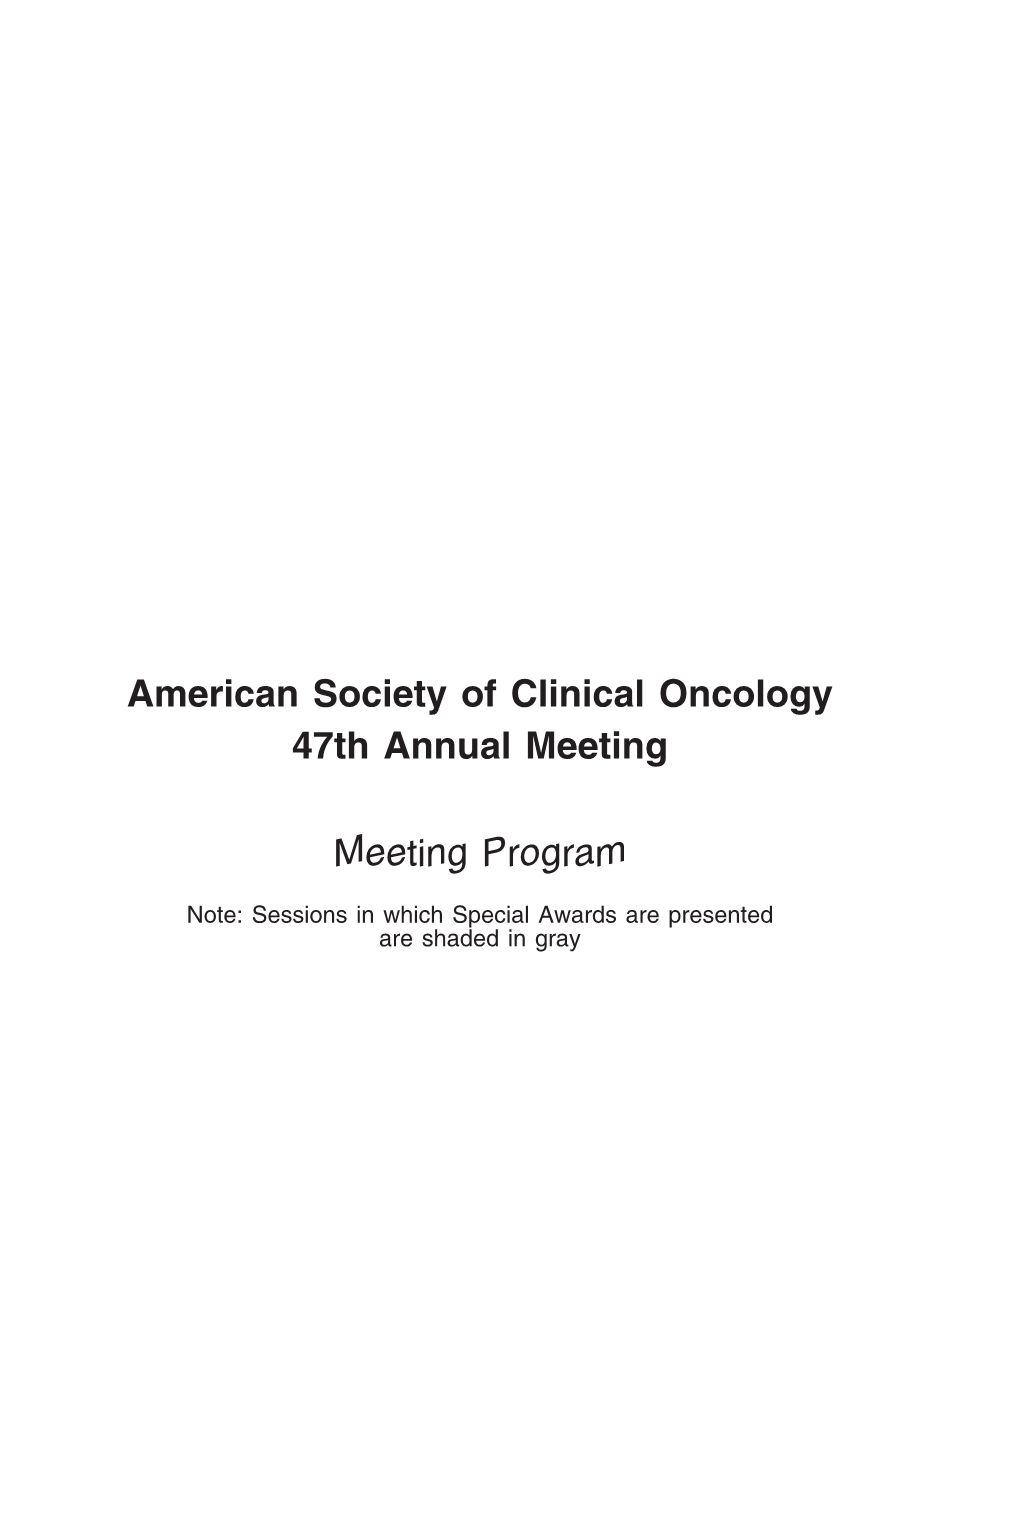 American Society of Clinical Oncology 47Th Annual Meeting